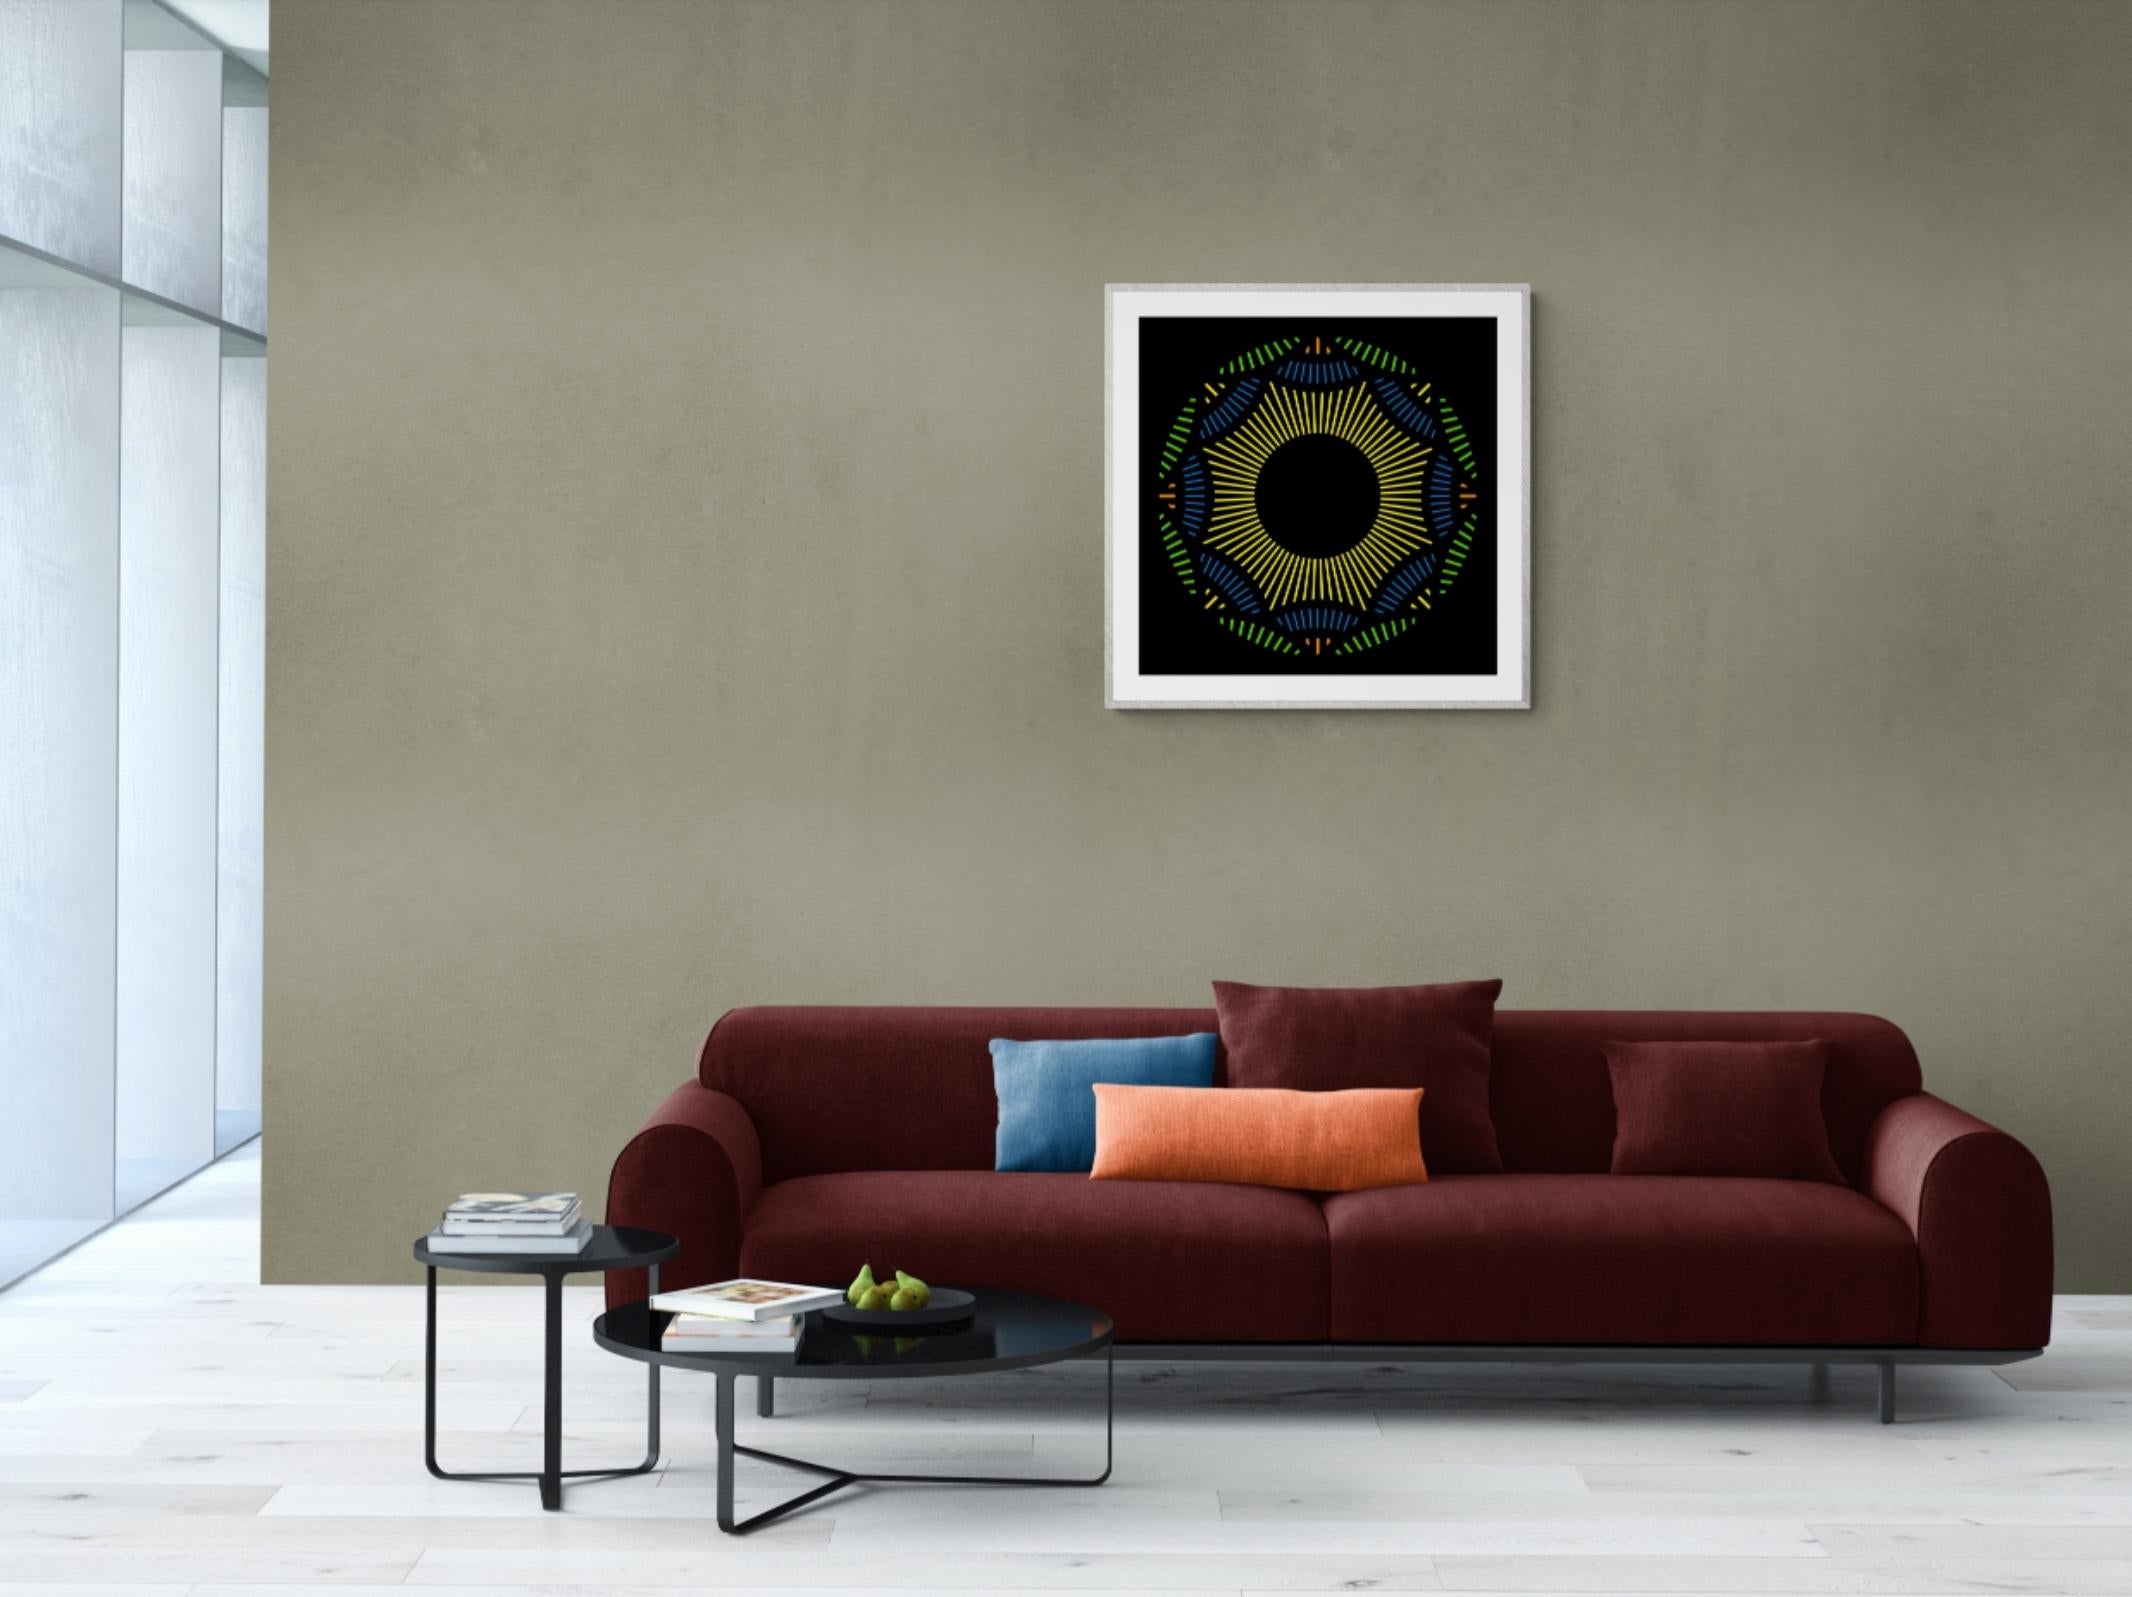 Nebulosa 29 - Black Abstract Print by Julio Campos